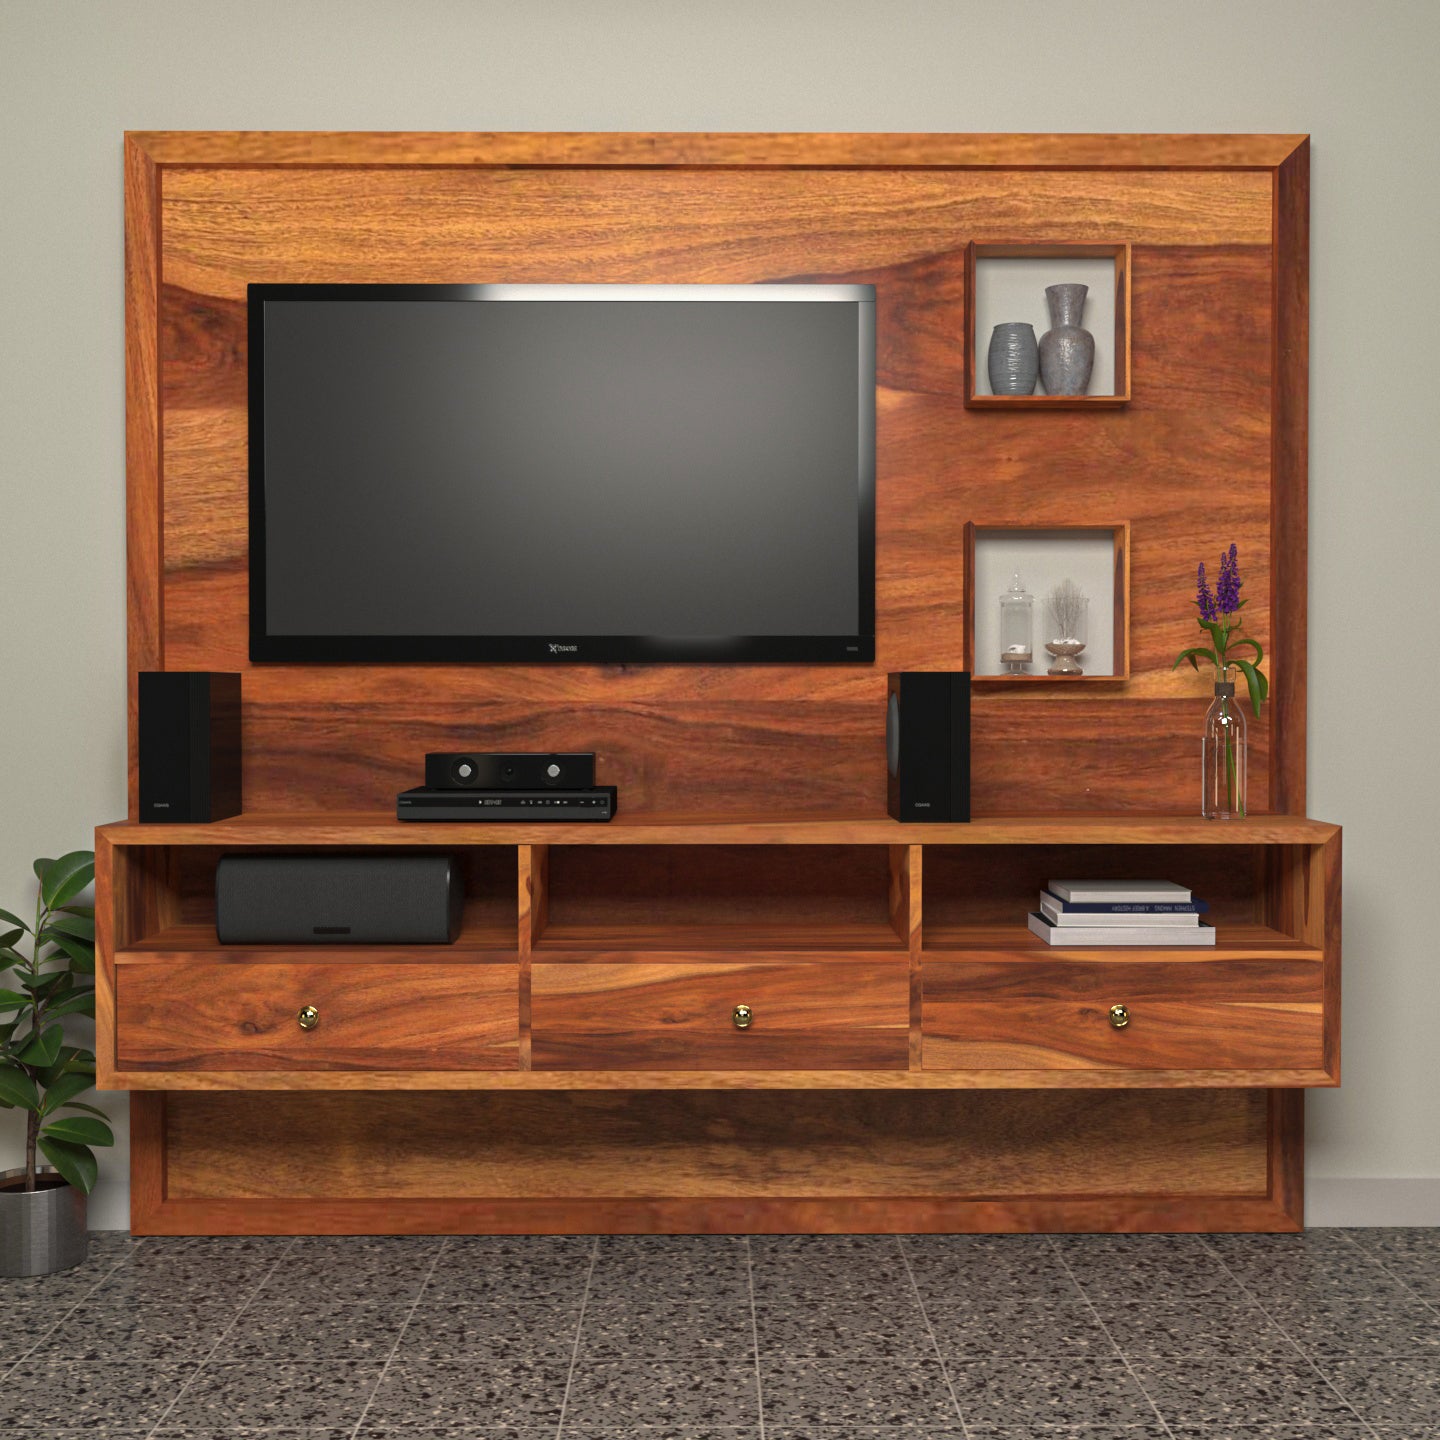 Modern Vintage Style Handmade Wooden TV Unit for Home Tv stand